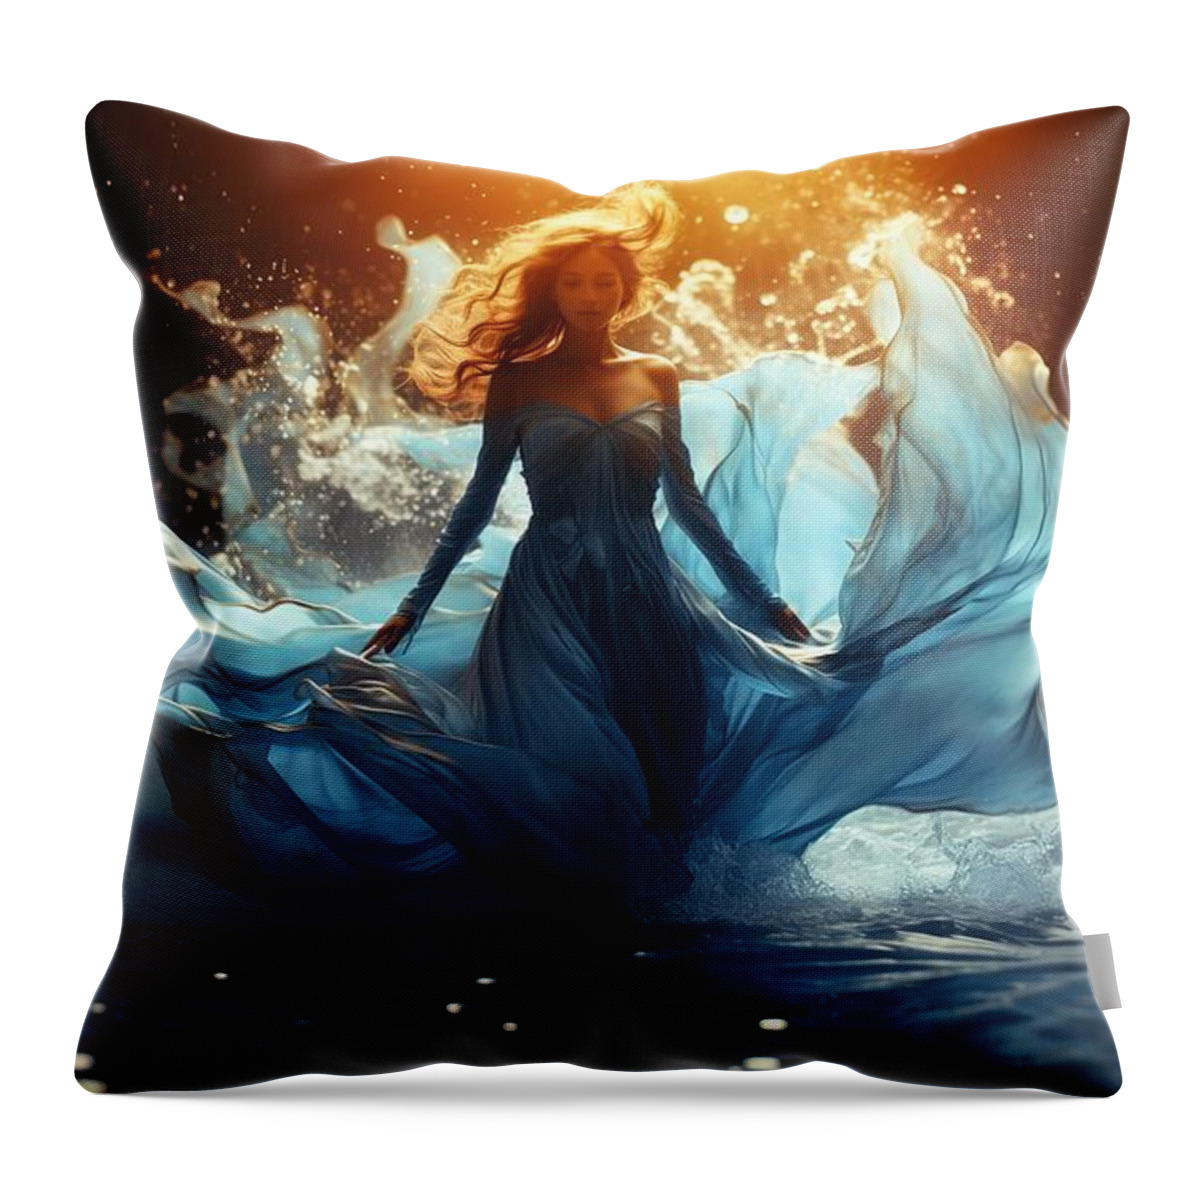 Woman Throw Pillow featuring the digital art Fantasy Water Nymph by Lilia S